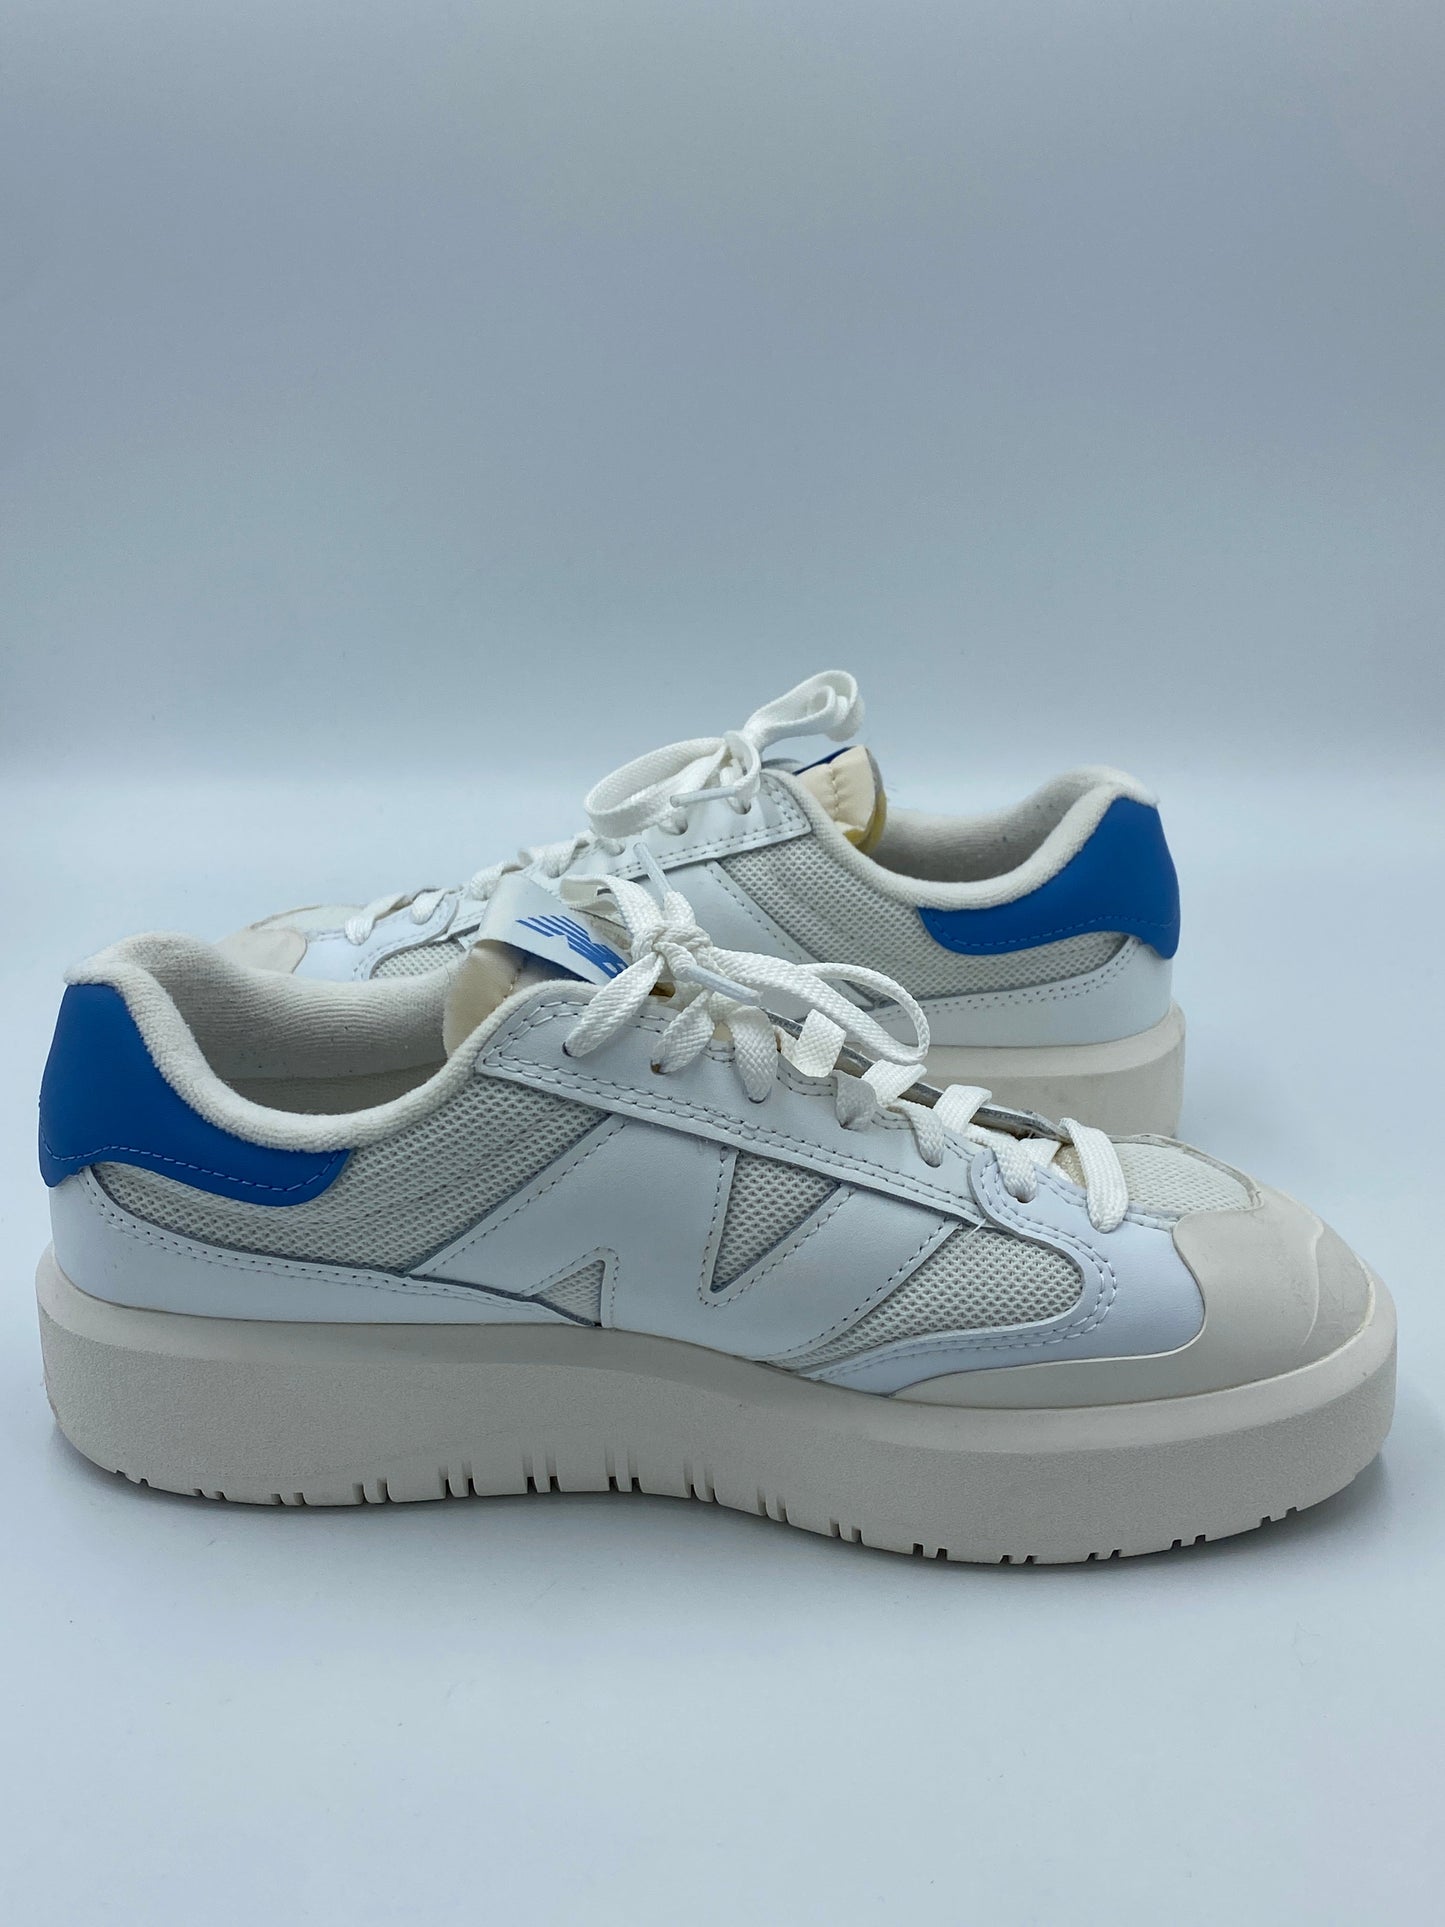 New Balance White Heritage Blue Sneakers,  Size 10 (W) / 8 (M)